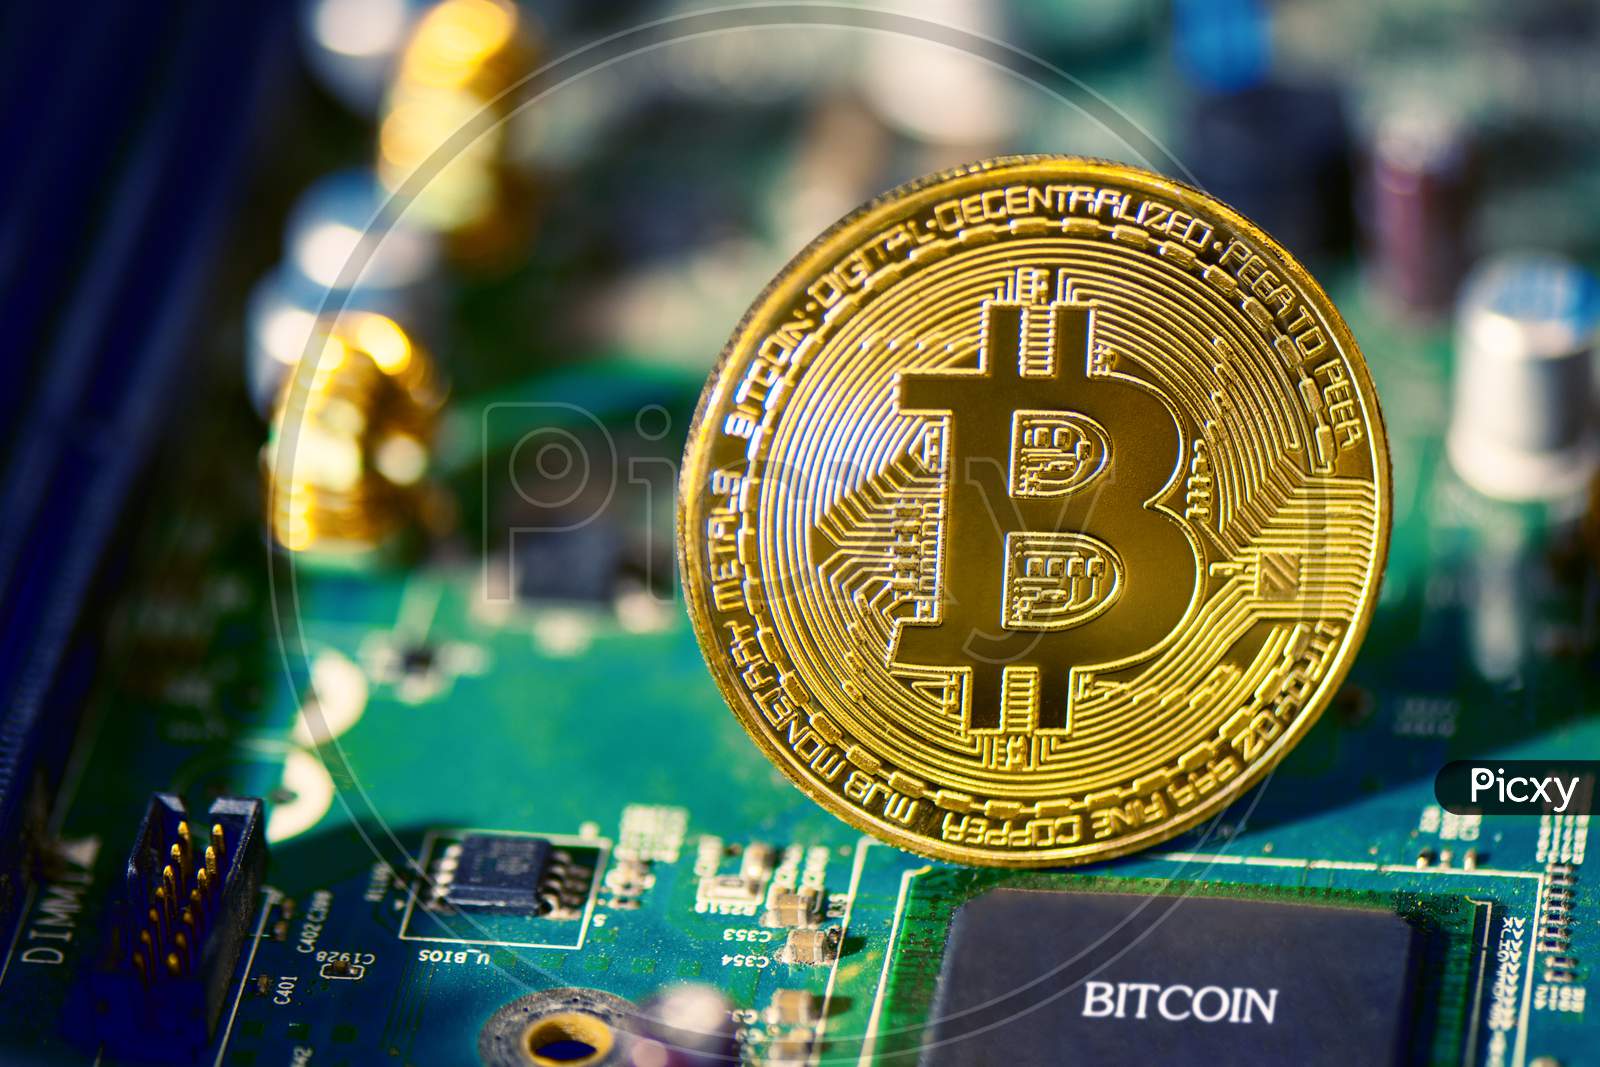 Bitcoin On Electronic Circuit Board. Cryptography And Electronic Money Concept. Currency Trading And Gold Mining Theme. Business And Technology Theme.